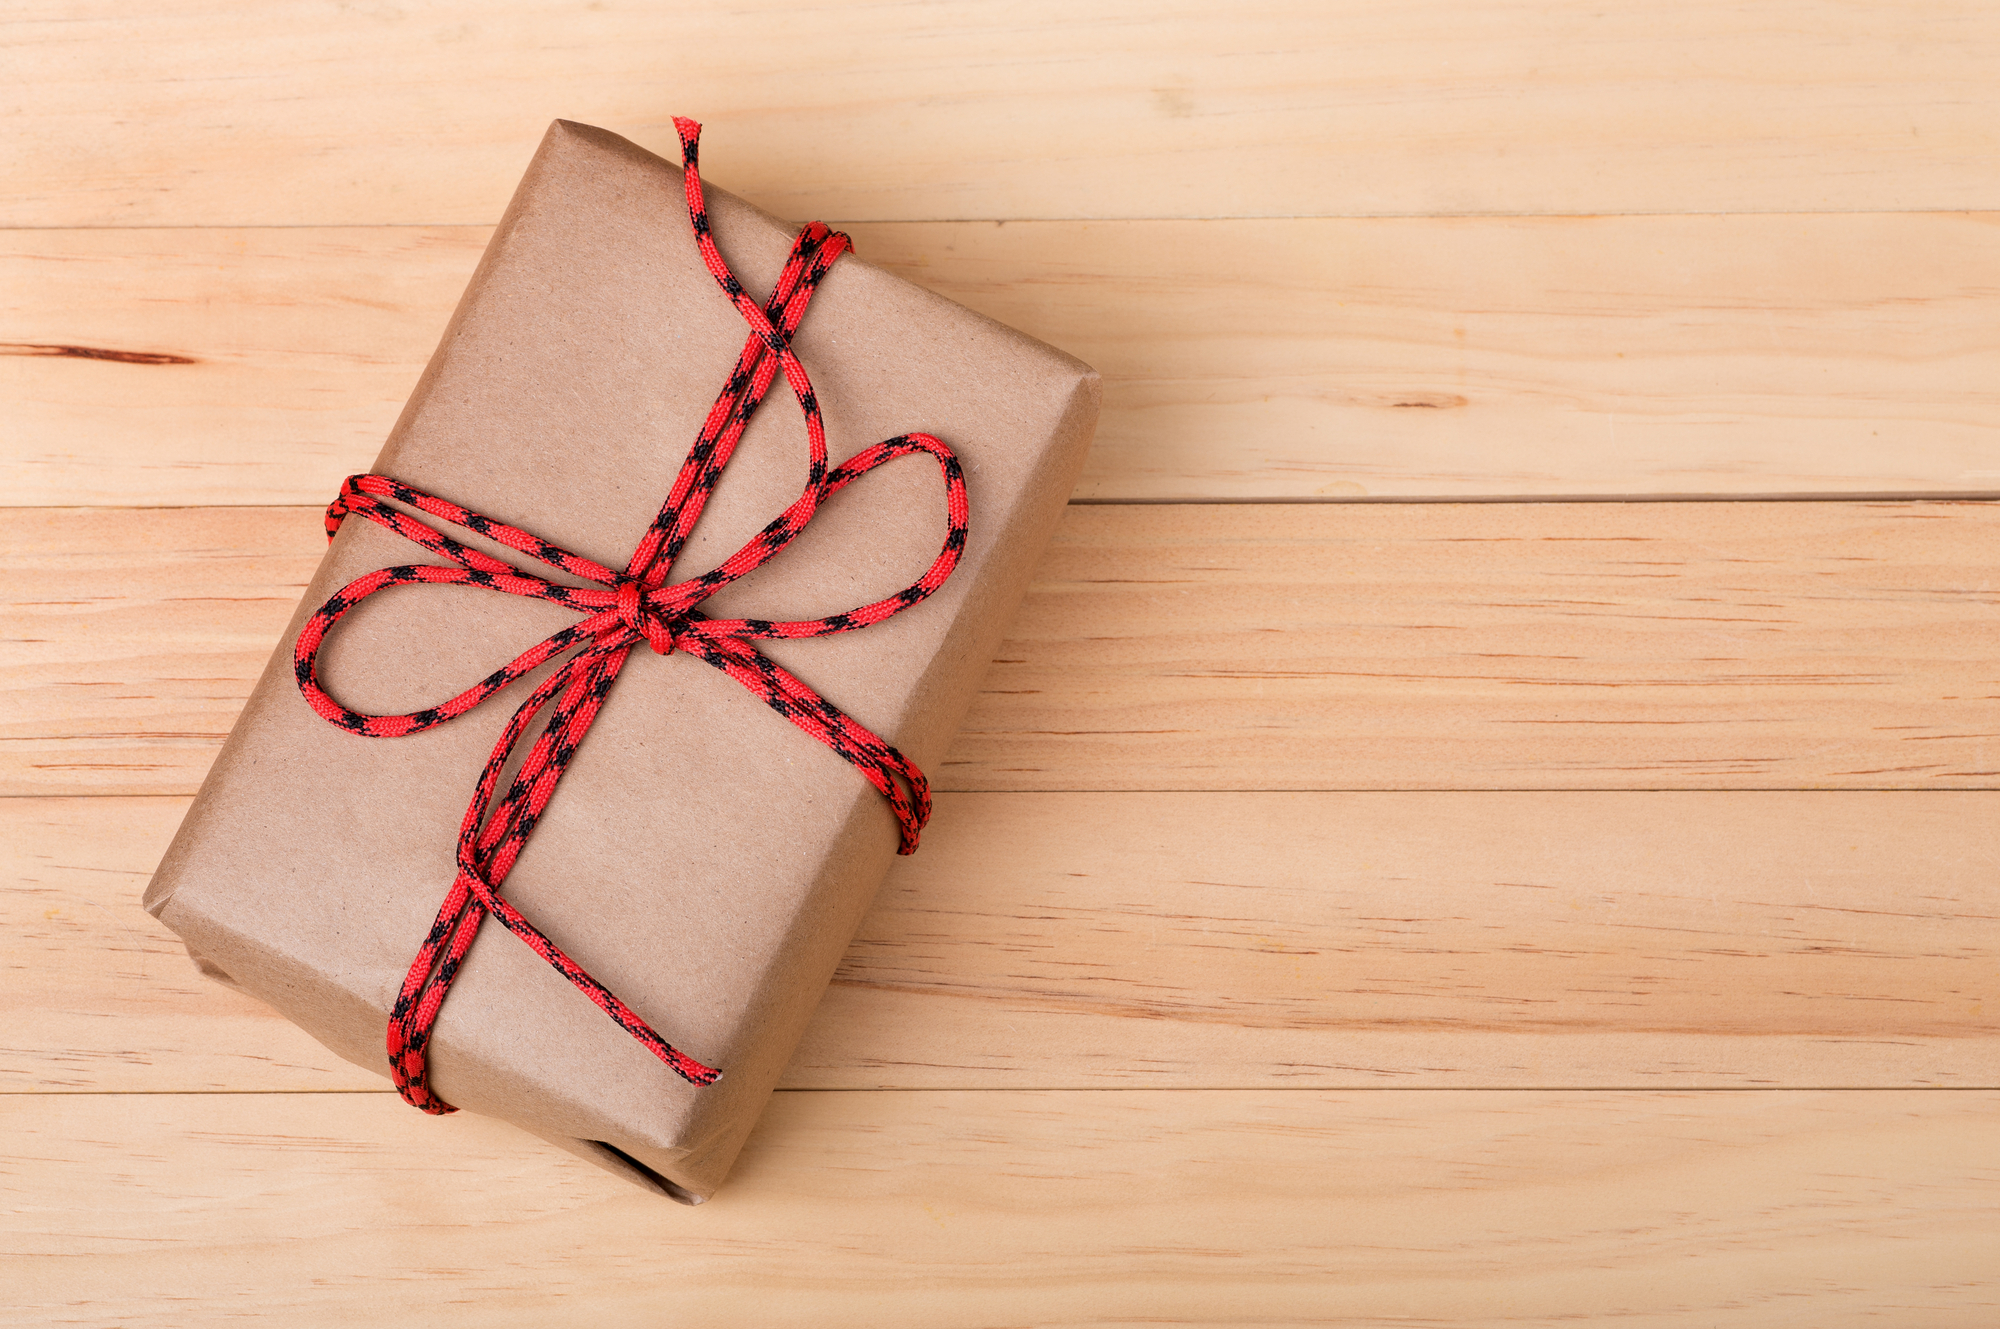 Mark Roemer image of a brown package with red ribbon sitting on a wooden desk